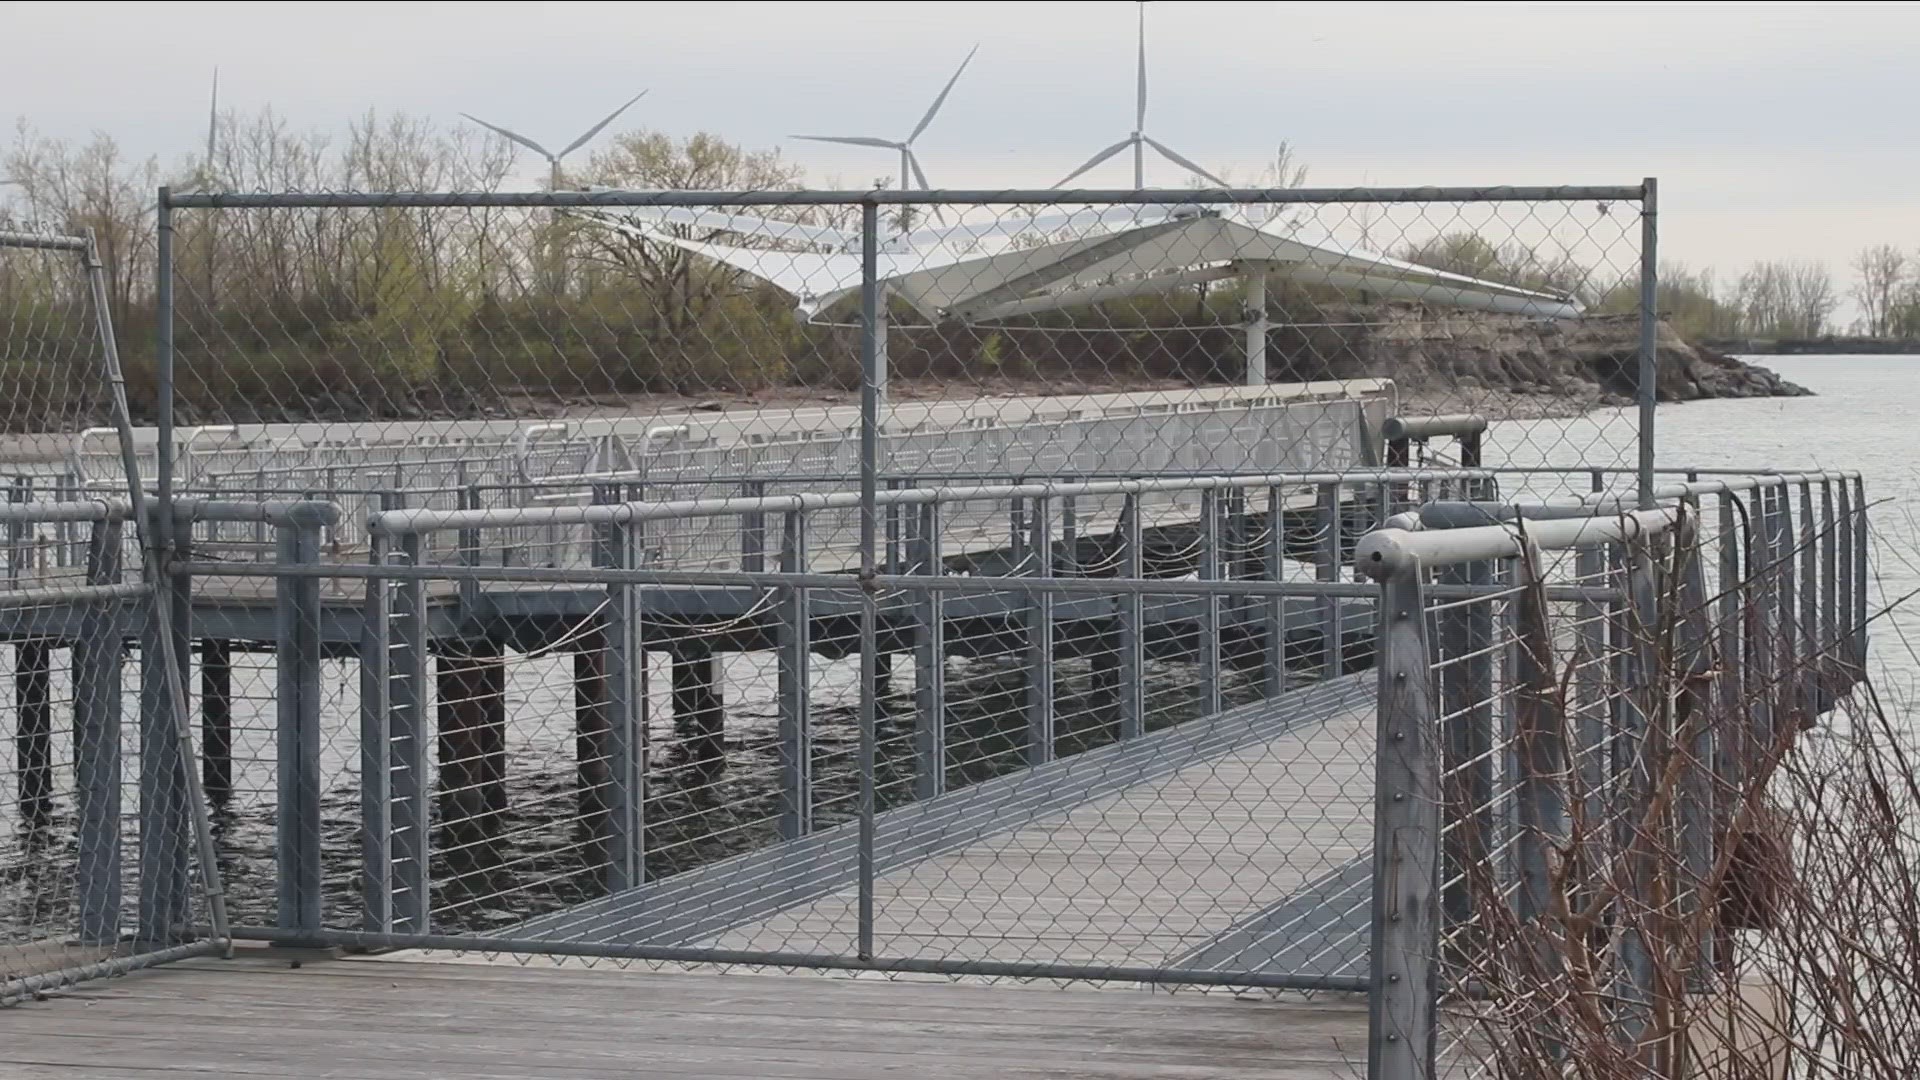 Residents want to know why the Tifft street pier isn't repaired